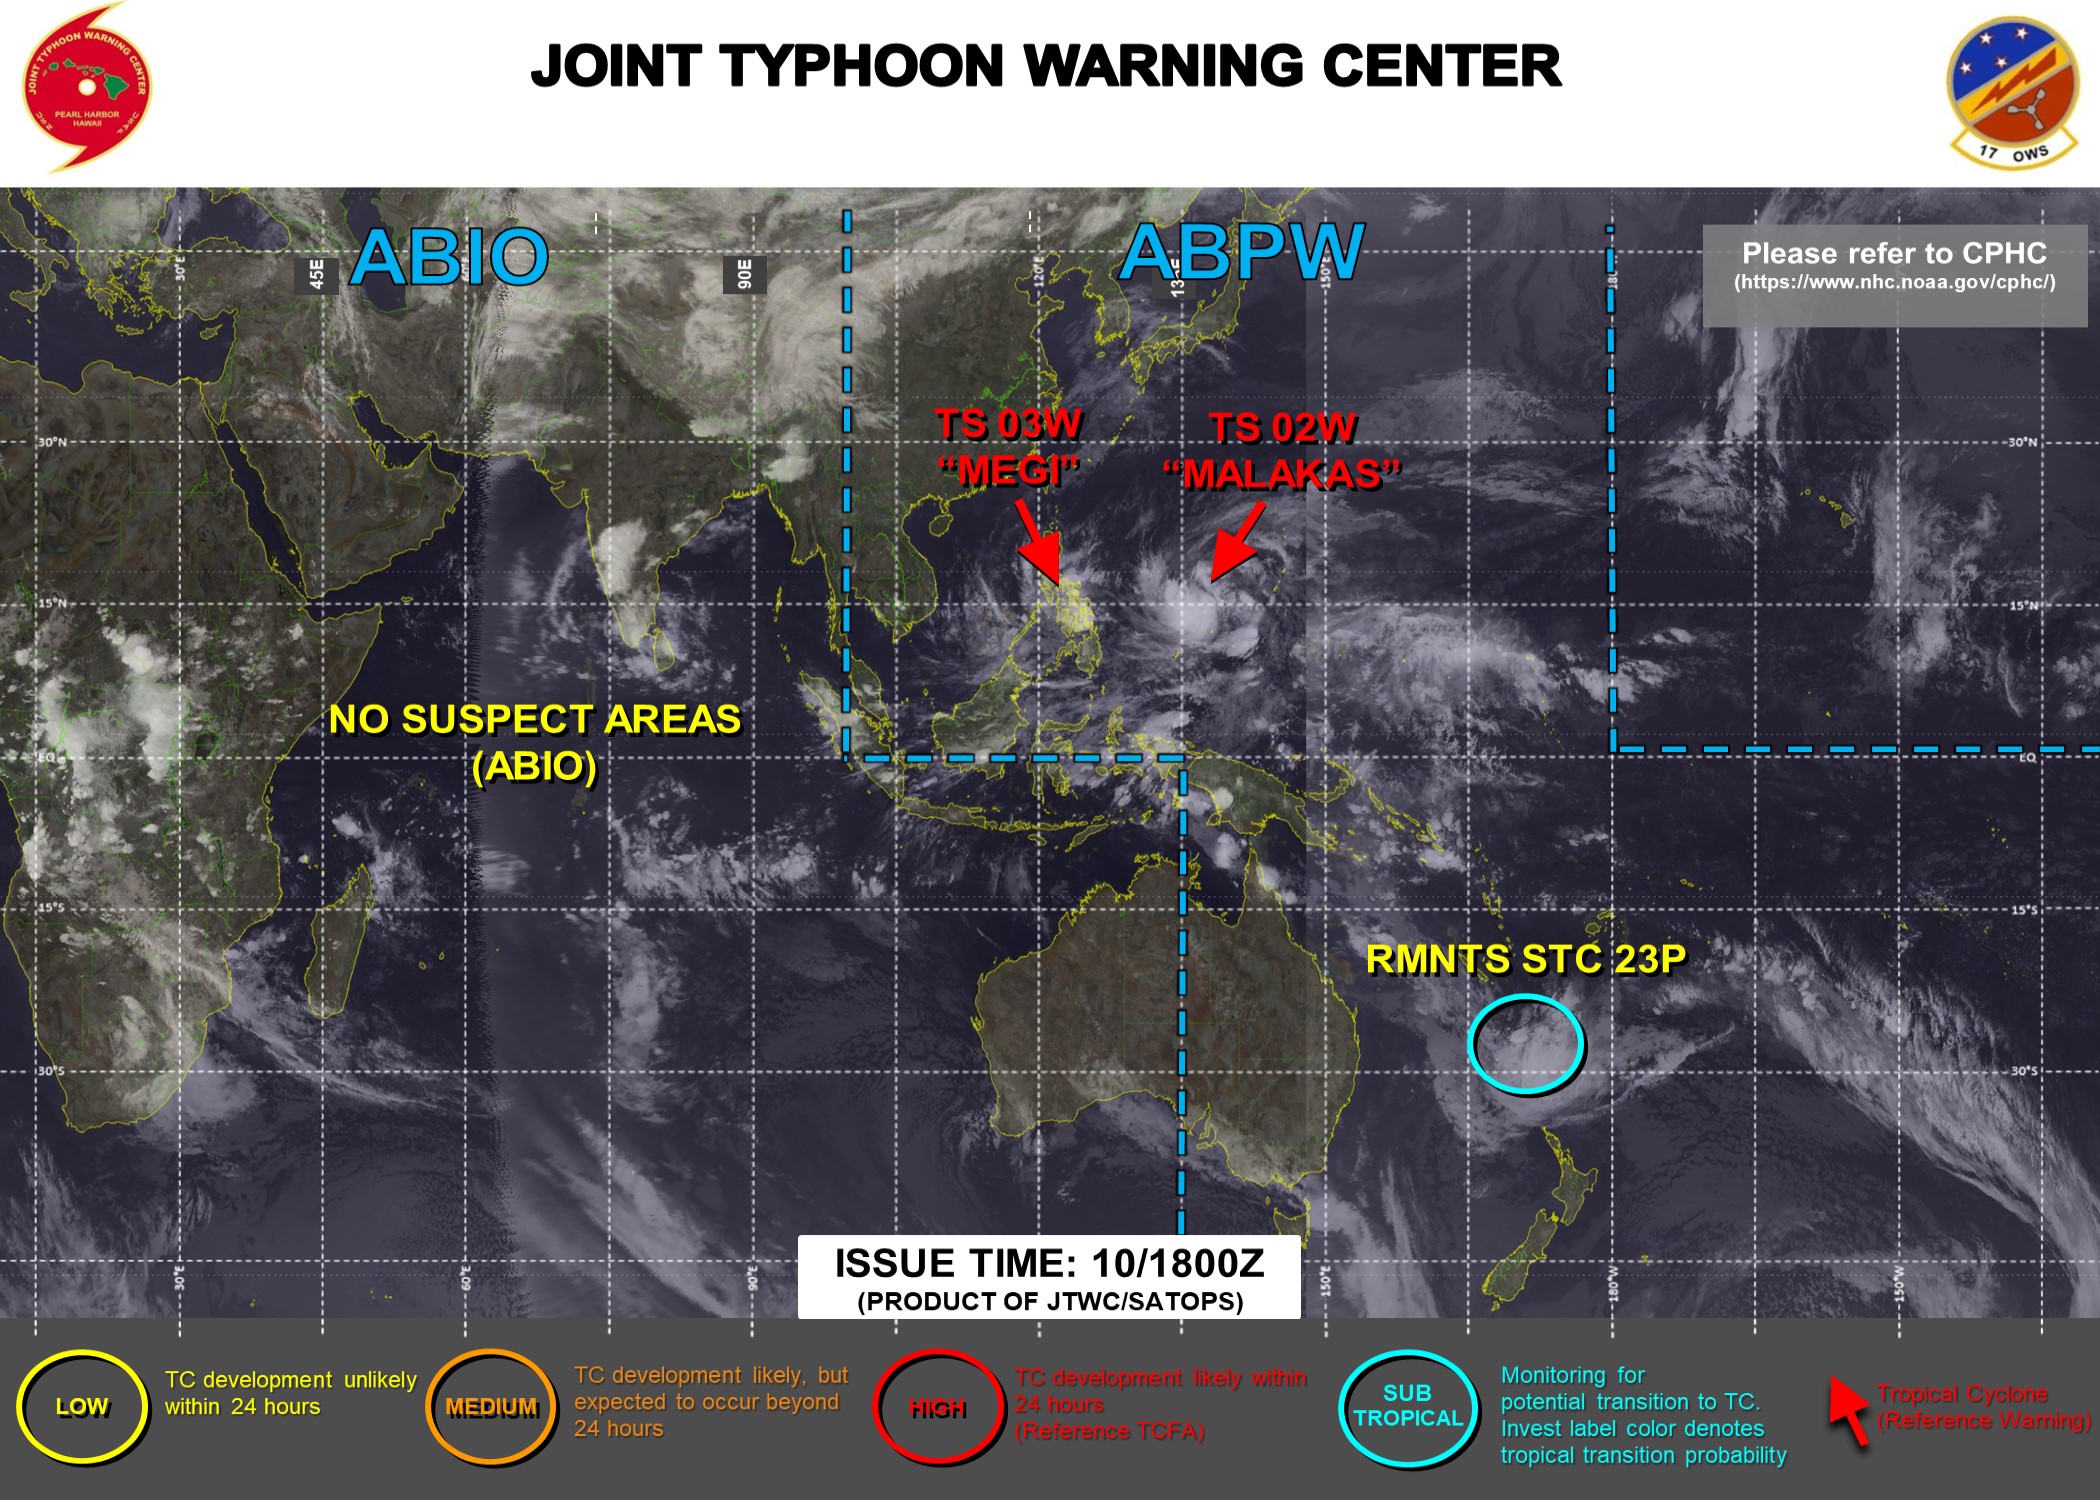 JTWC IS ISSUING 6HOURLY WARNINGS ON TS 02W(MALAKAS) AND TS 03W(MEGI). 3HOURLY SATELLITE BULLETINS ARE ISSUED ON BOTH SYSTEMS AND ON SUBTROPICAL TC 23P(FILI).